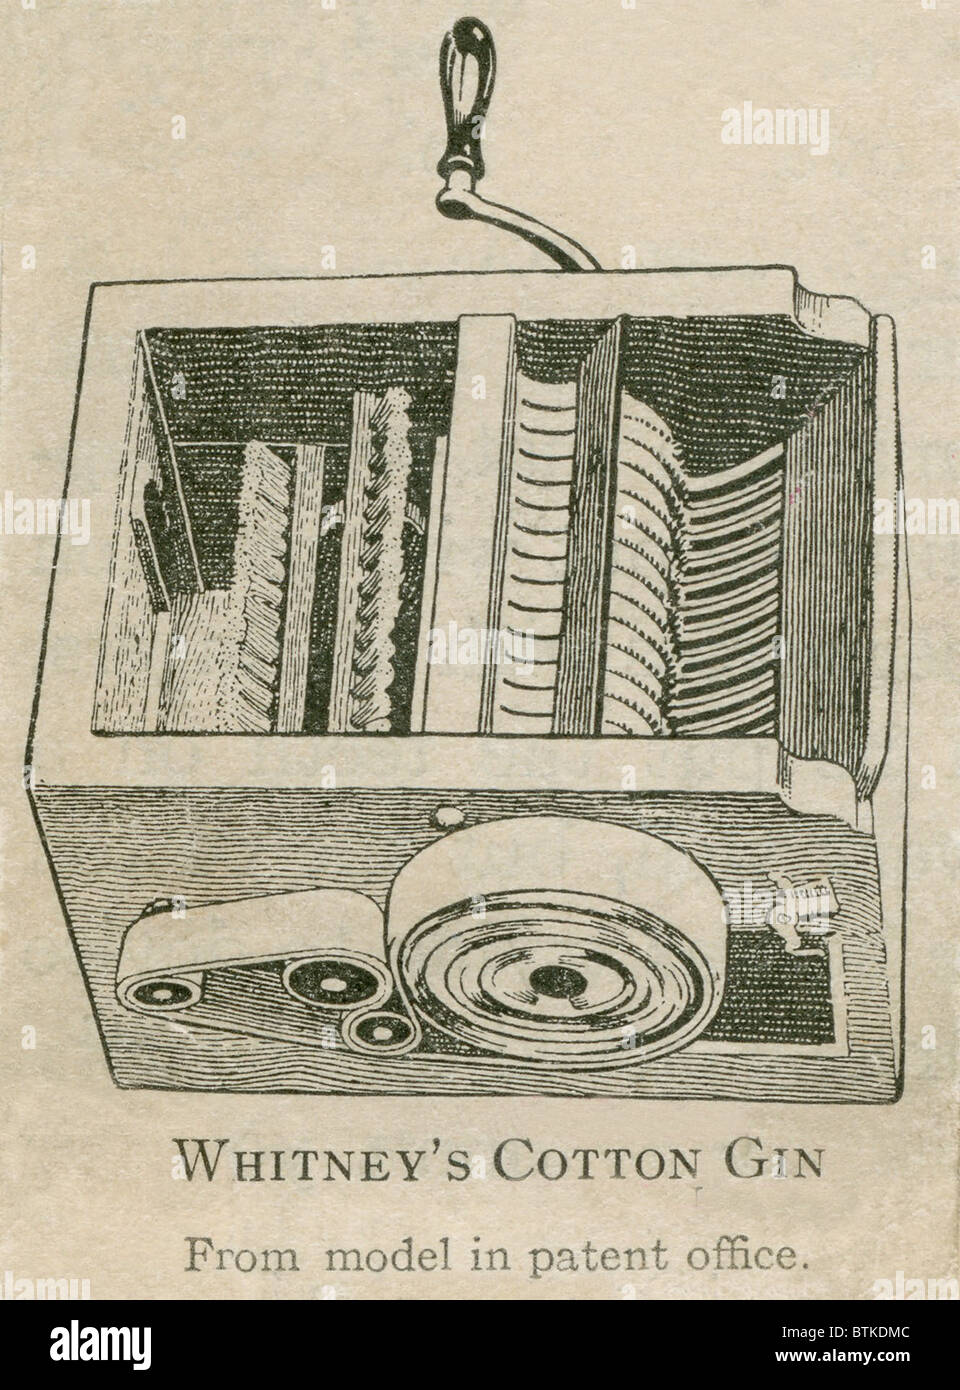 Patent model of Whitney's Cotton Gin of 1793. The invention for quickly separating seeds from the cotton, increased the supply of cotton for British Industrial Revolution cotton mills. Stock Photo